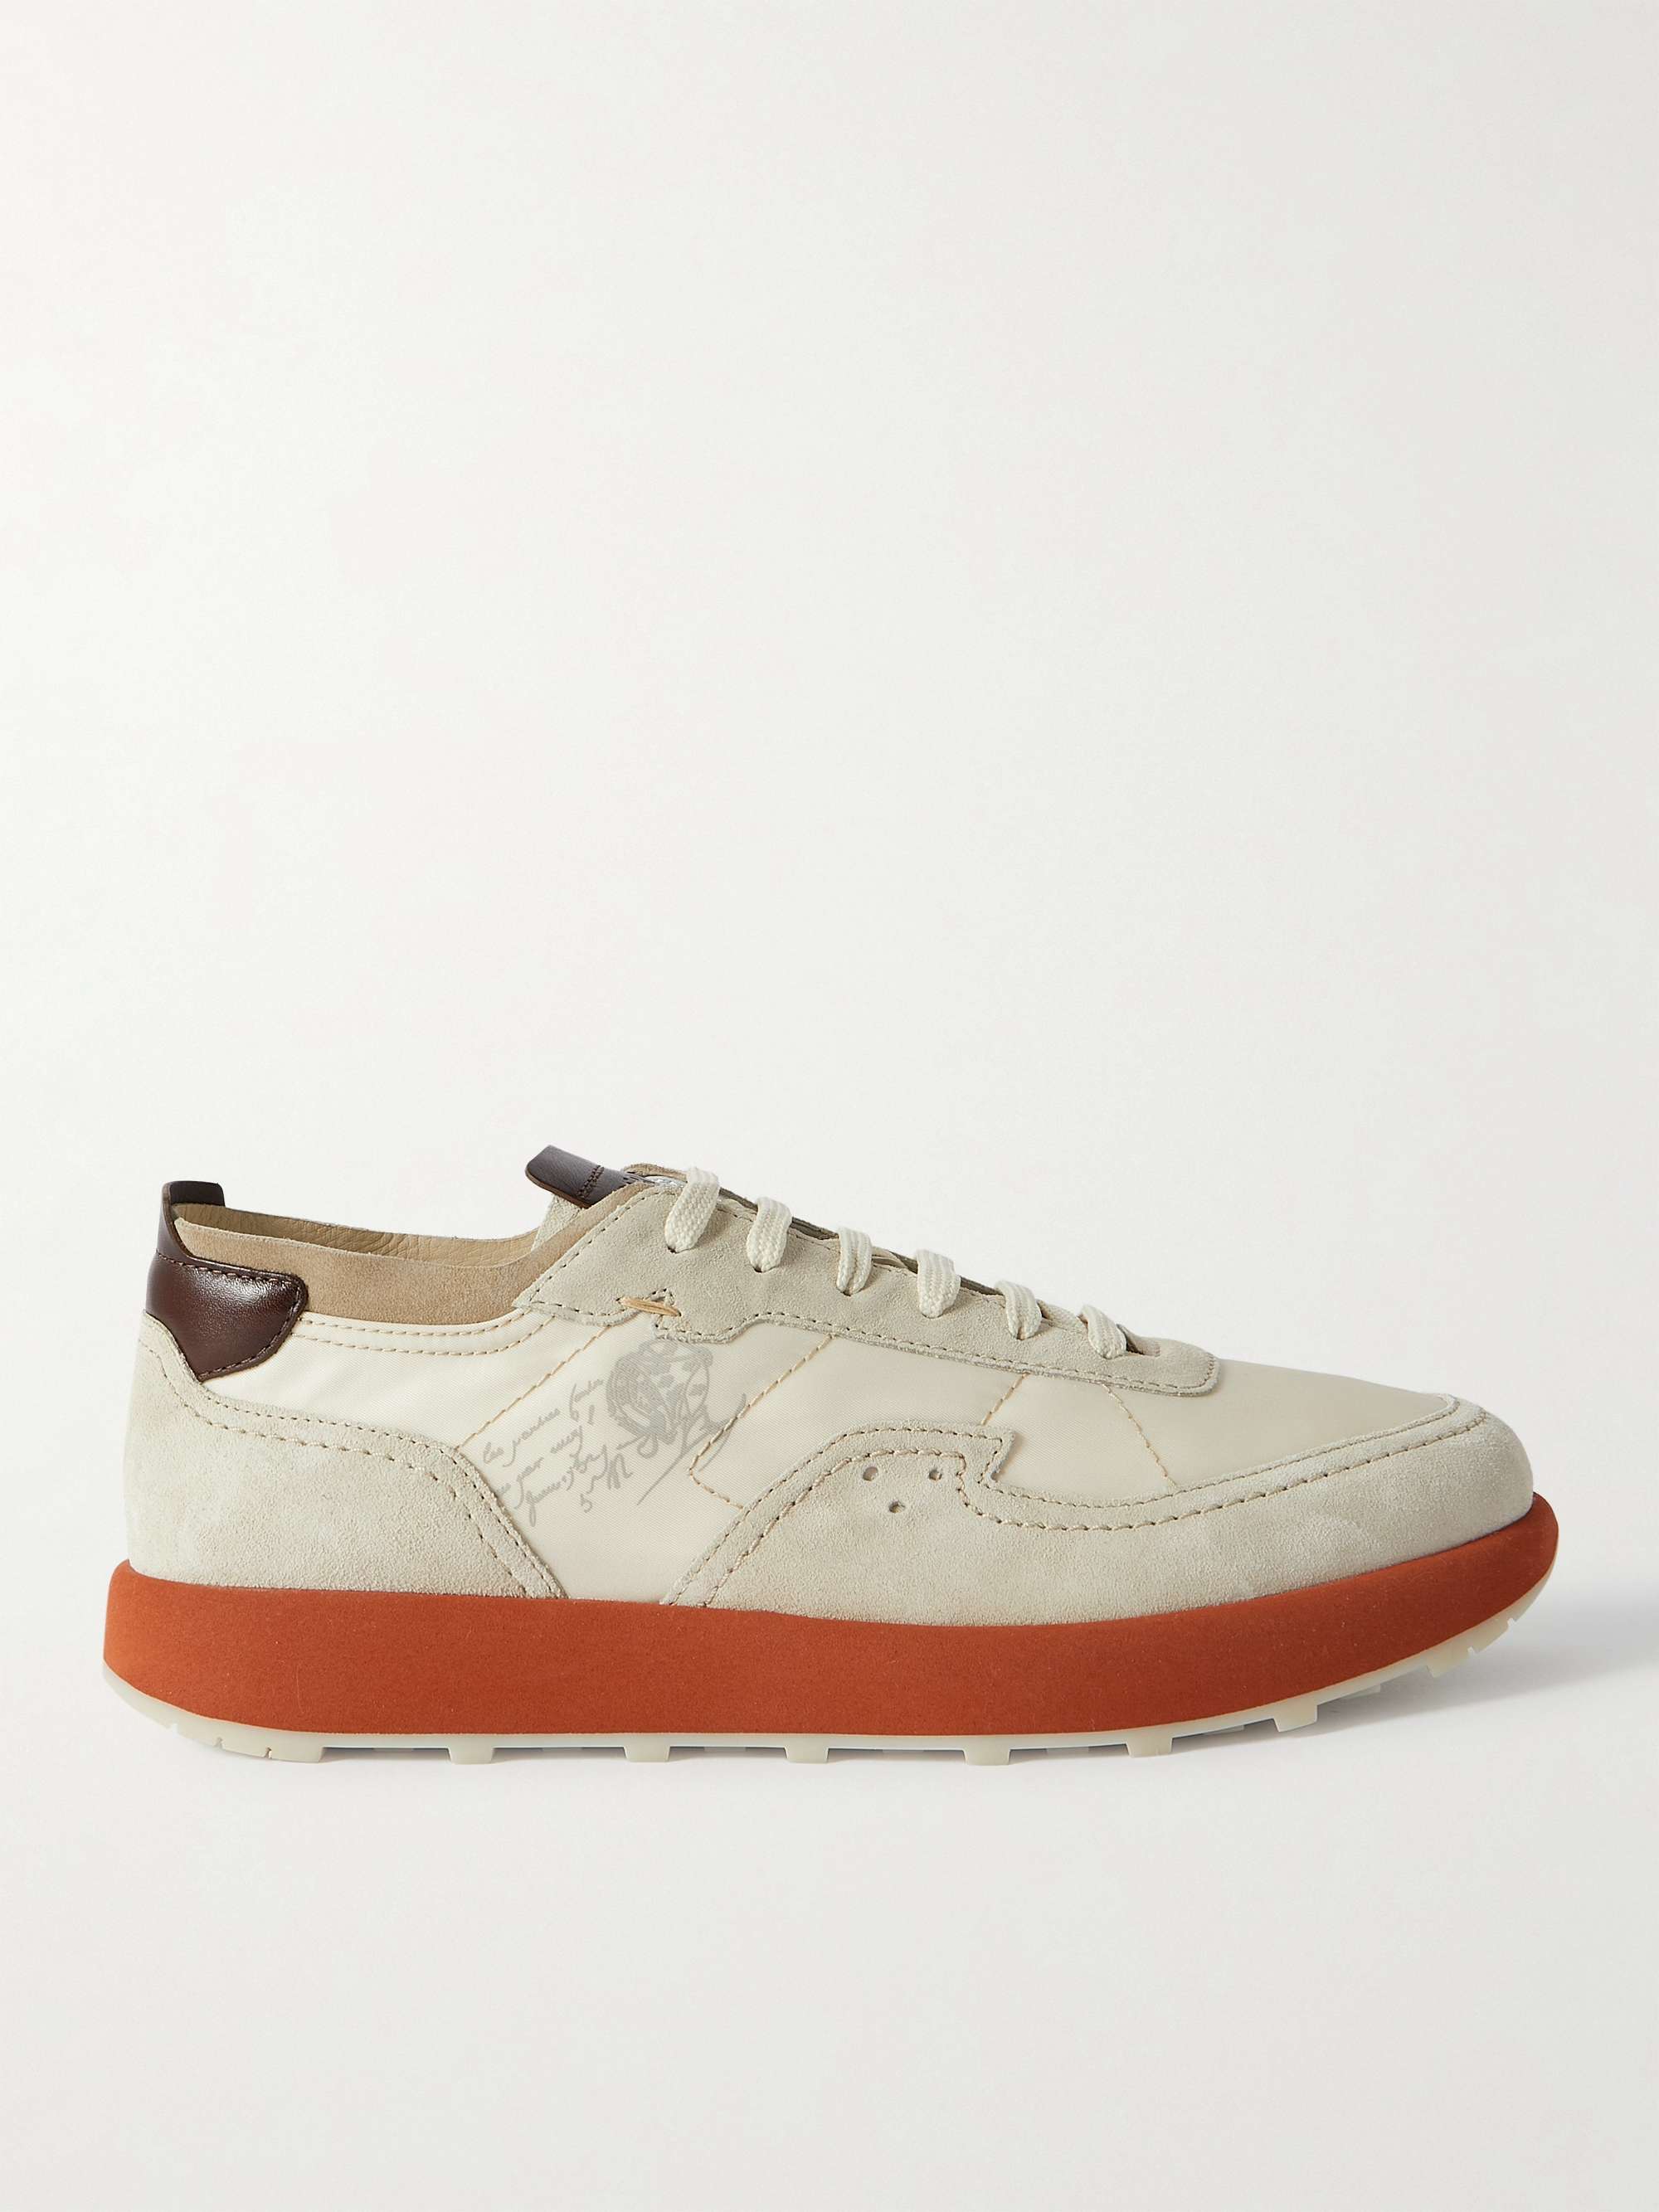 BERLUTI Light Track Venezia Leather and Suede-Trimmed Mesh Sneakers